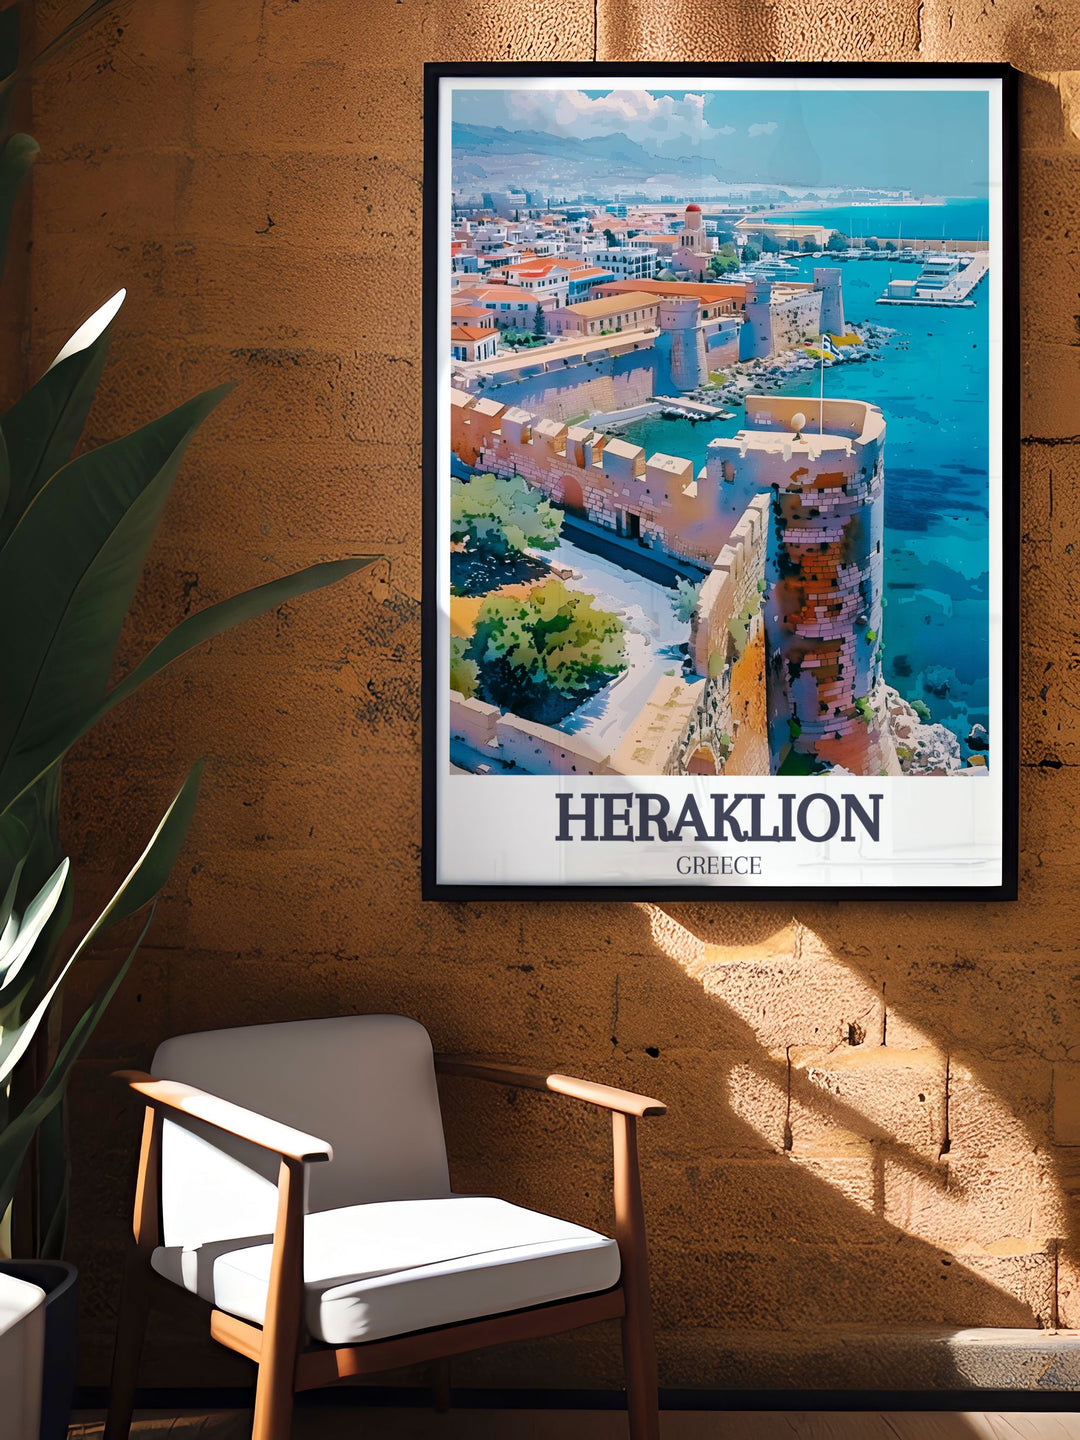 Vintage poster of Heraklion, featuring the iconic Venetian Walls, Crete, Greece. This piece captures the timeless beauty and historical significance of the walls, evoking the charm of Greek cultural heritage and military architecture.